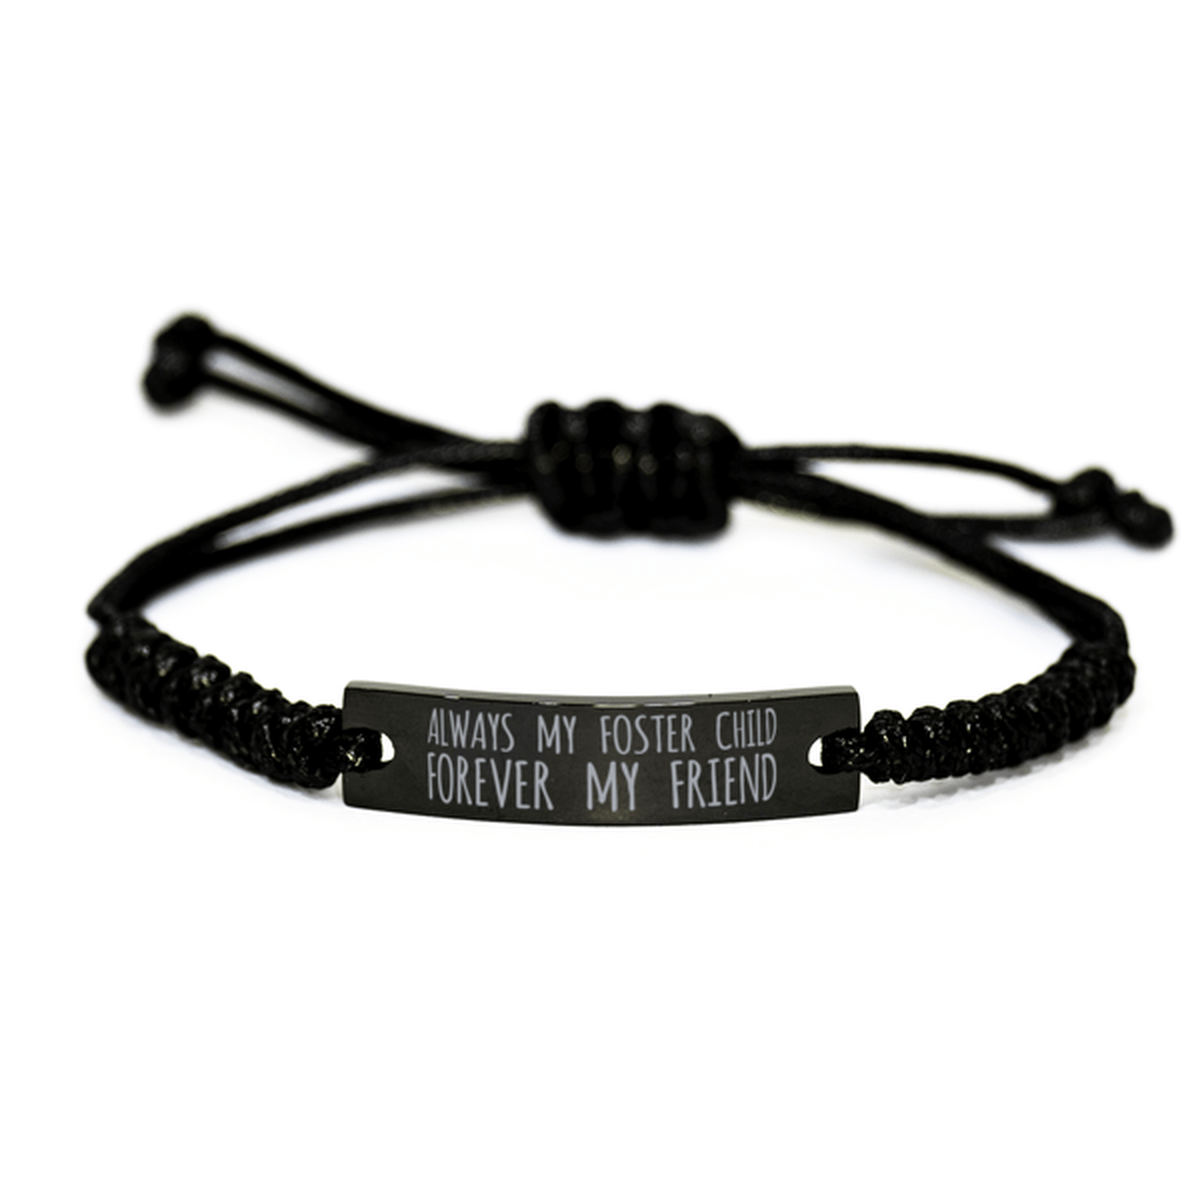 Inspirational Foster Child Black Rope Bracelet, Always My Foster Child Forever My Friend, Best Birthday Gifts For Family